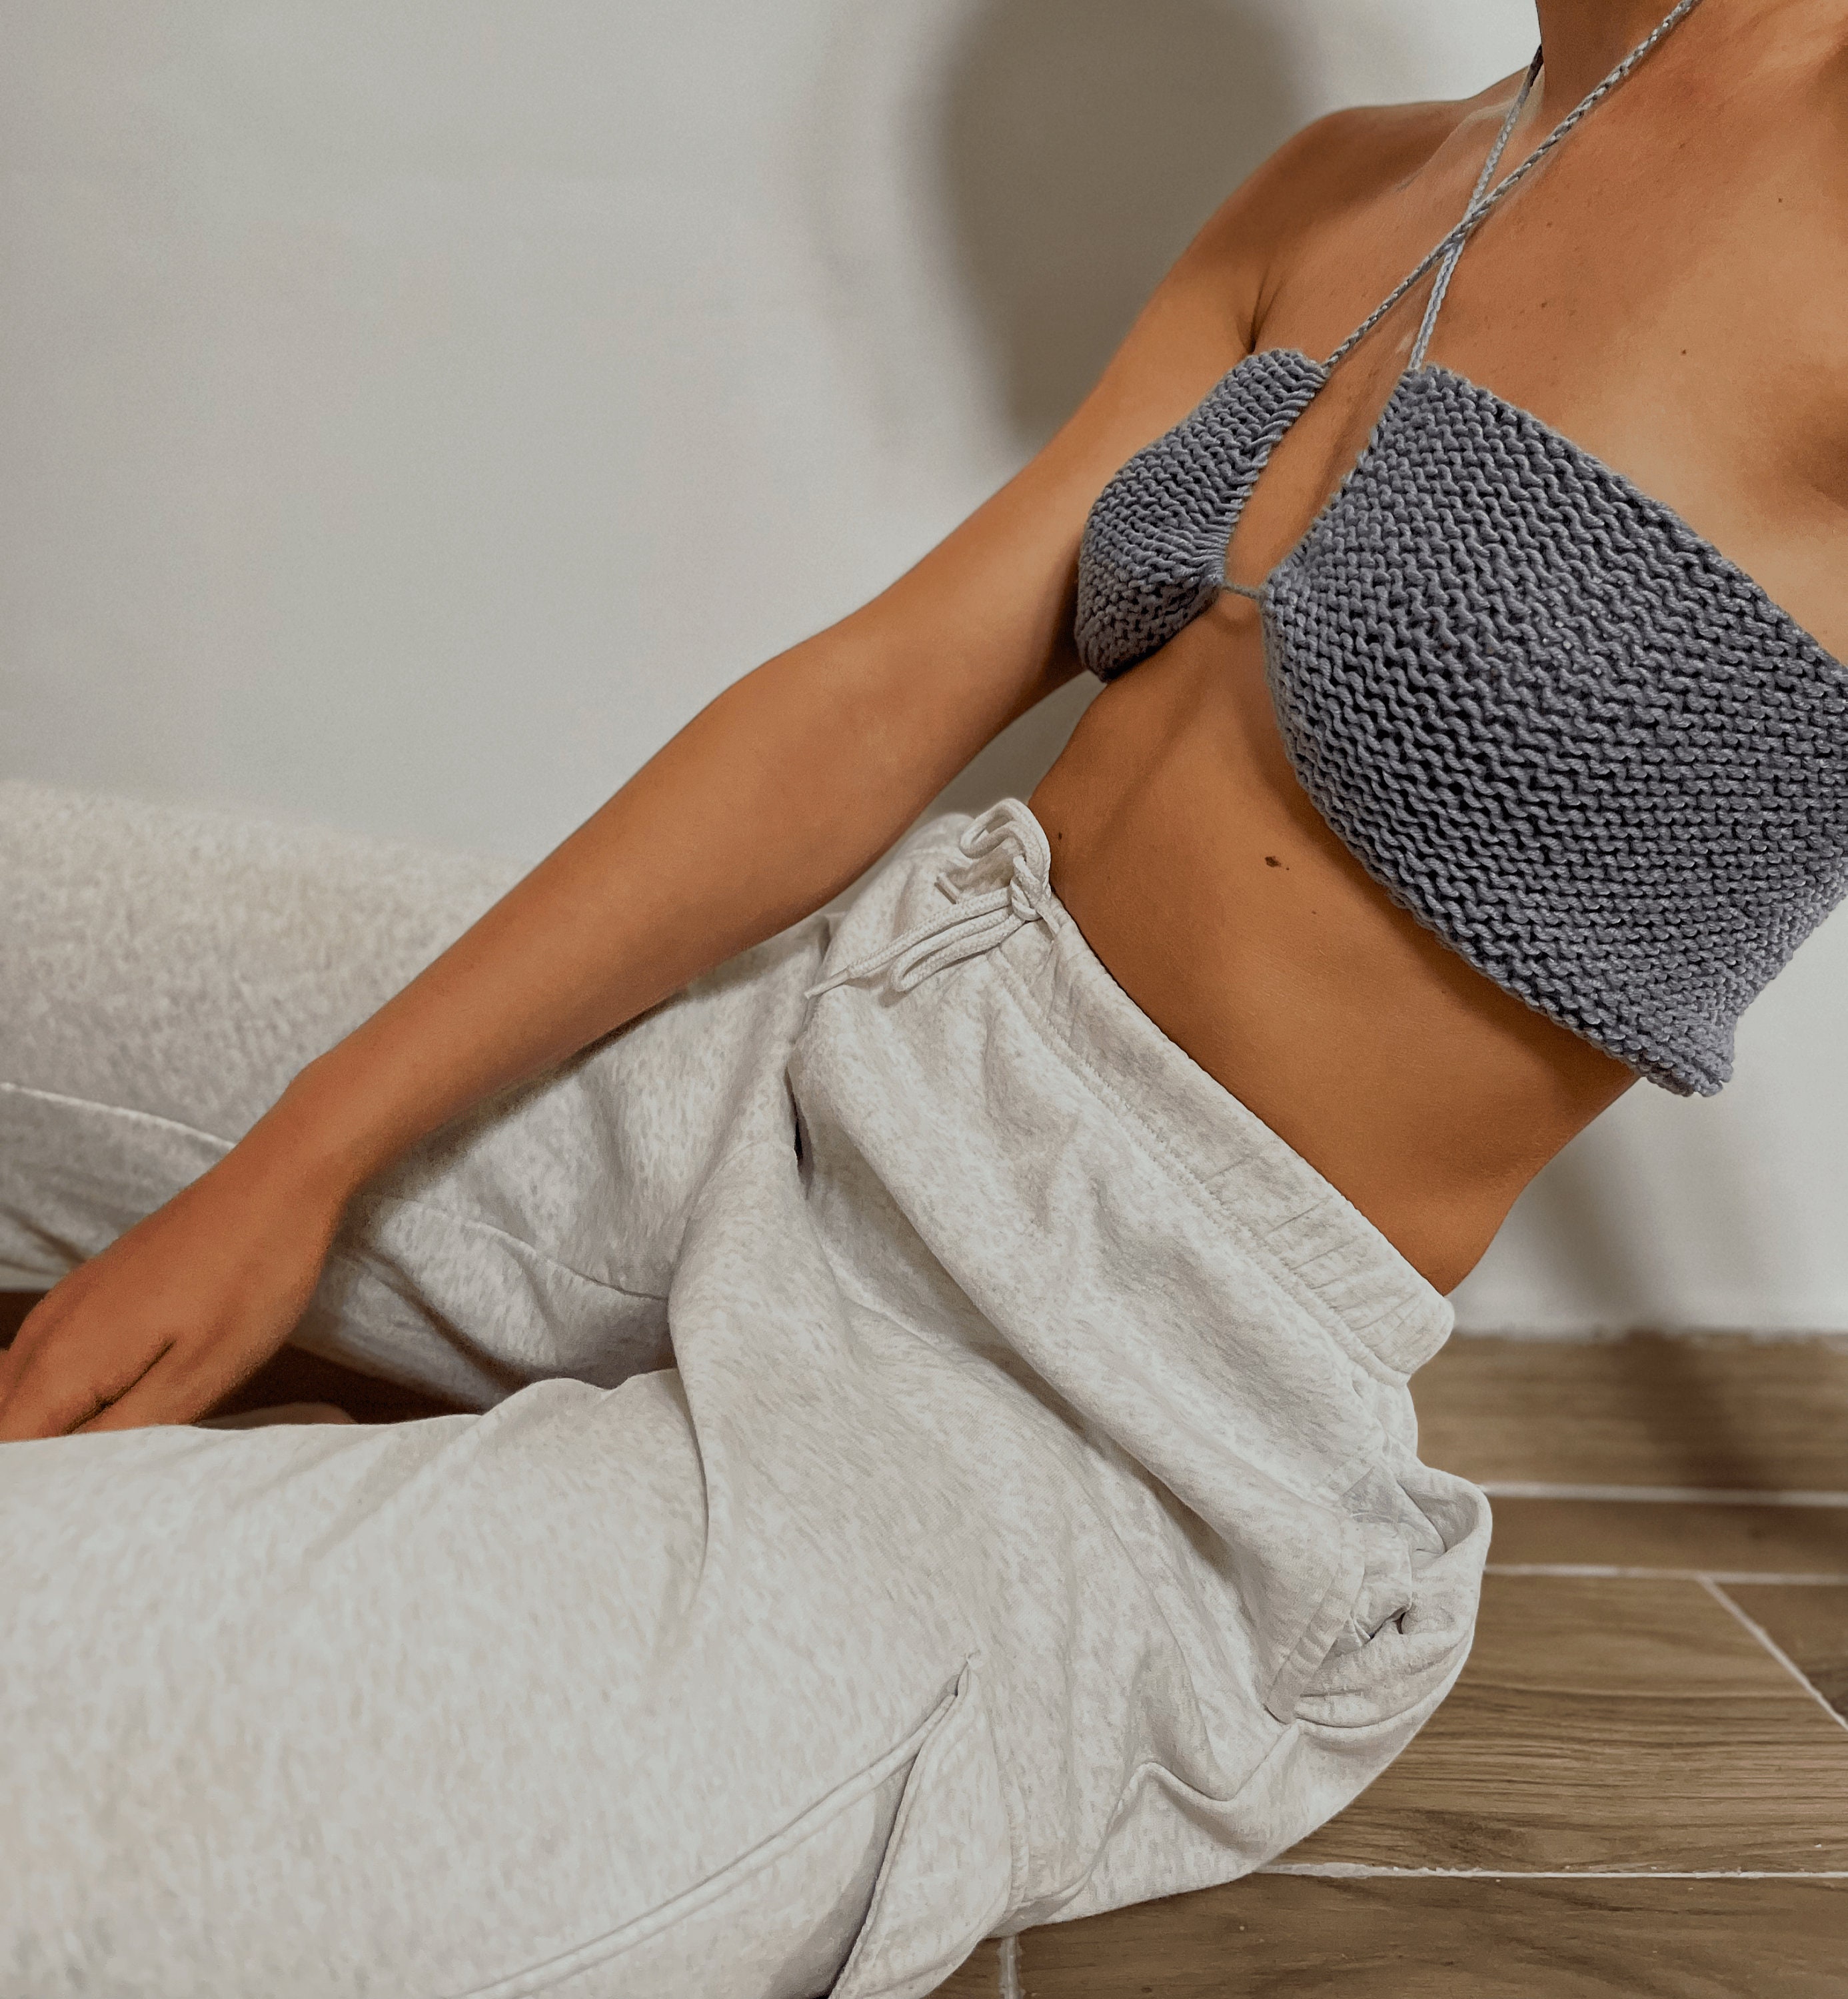 Knitted Summer Top, Organic Knitted Wool Top, Crop Top Bralette, Soft and  Stylish Crop Top, Hand-knitted Bralette, Comfortable Summer Top 